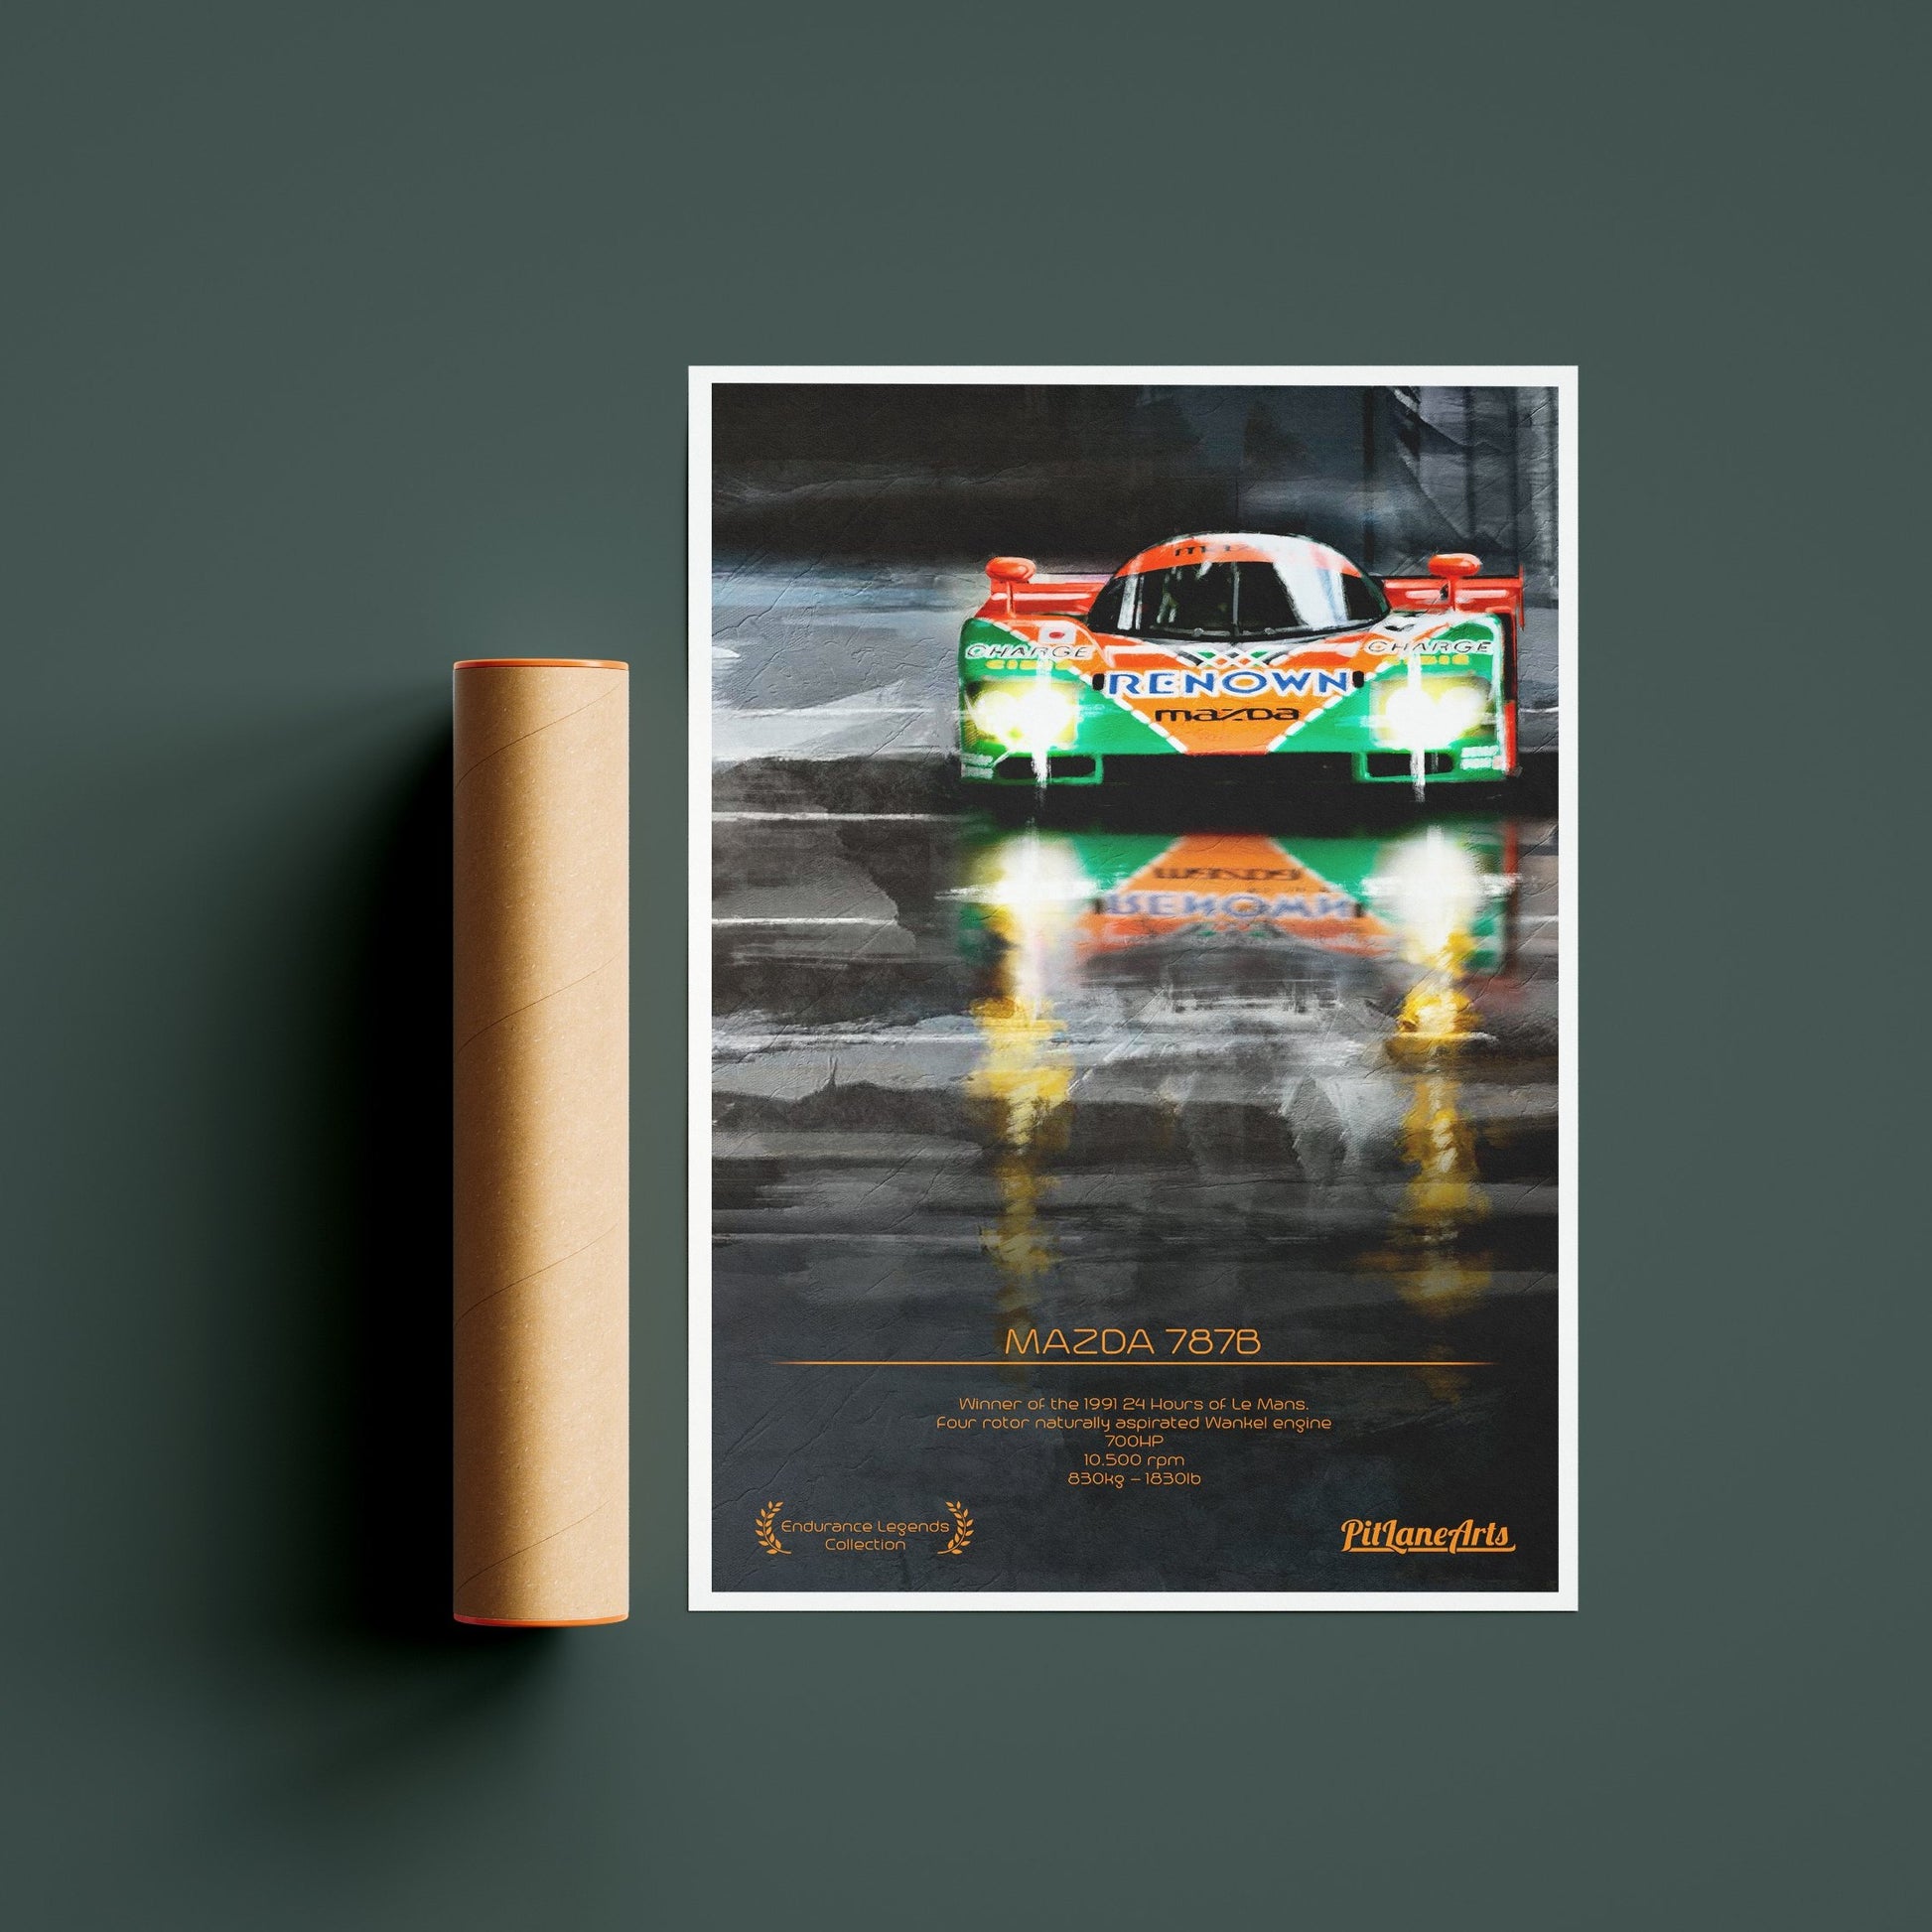 Mazda 787 B Le Mans race car Poster print with delivery tube - PitLaneArts